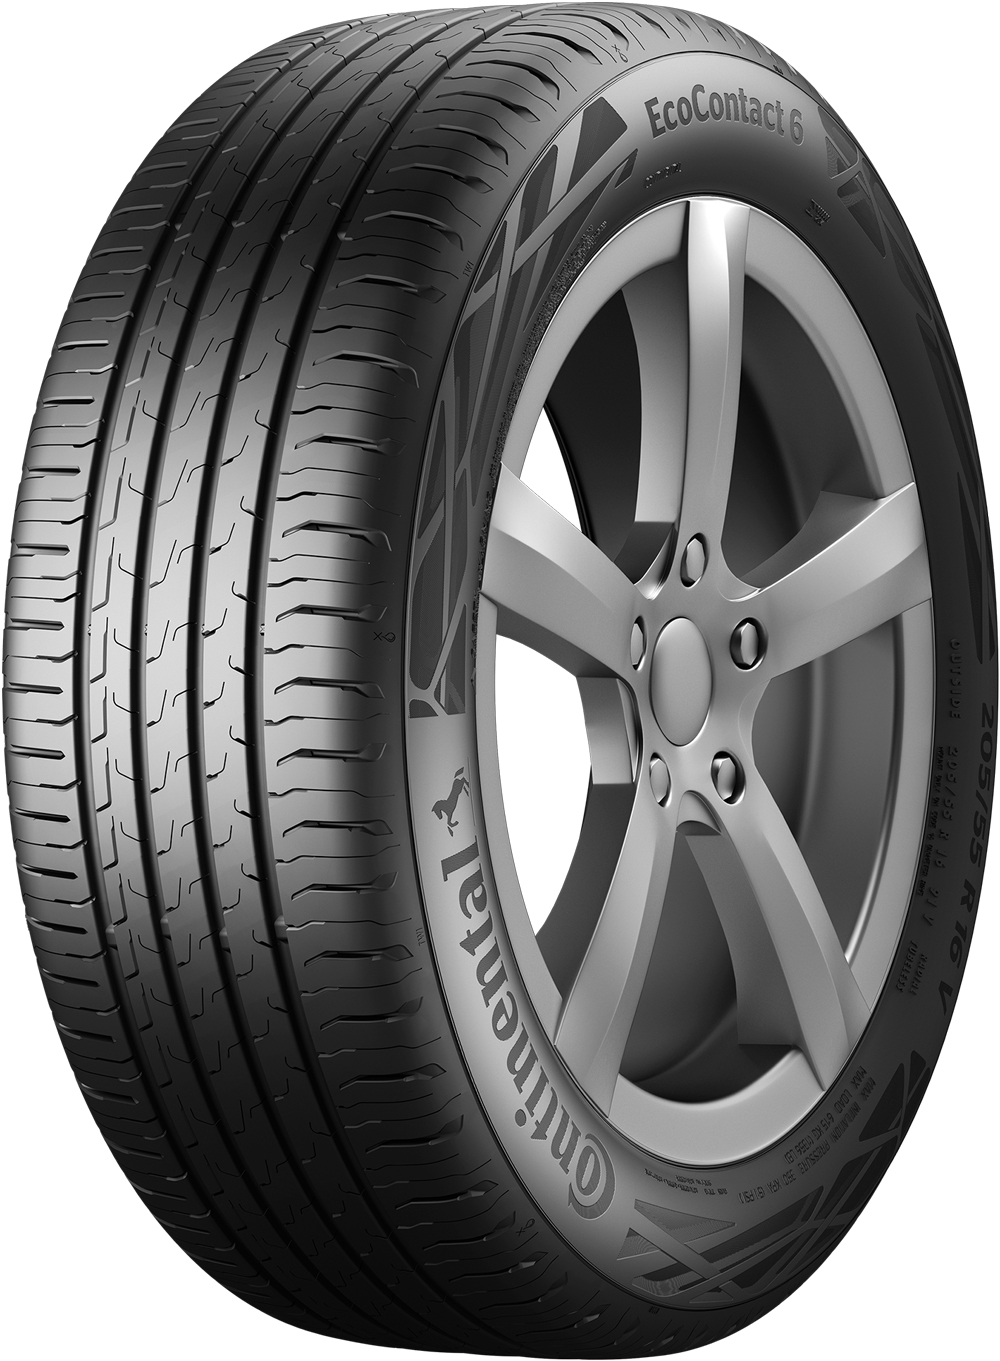 Anvelope auto CONTINENTAL EcoContact 6 VOL XL VOLVO 235/50 R19 103V